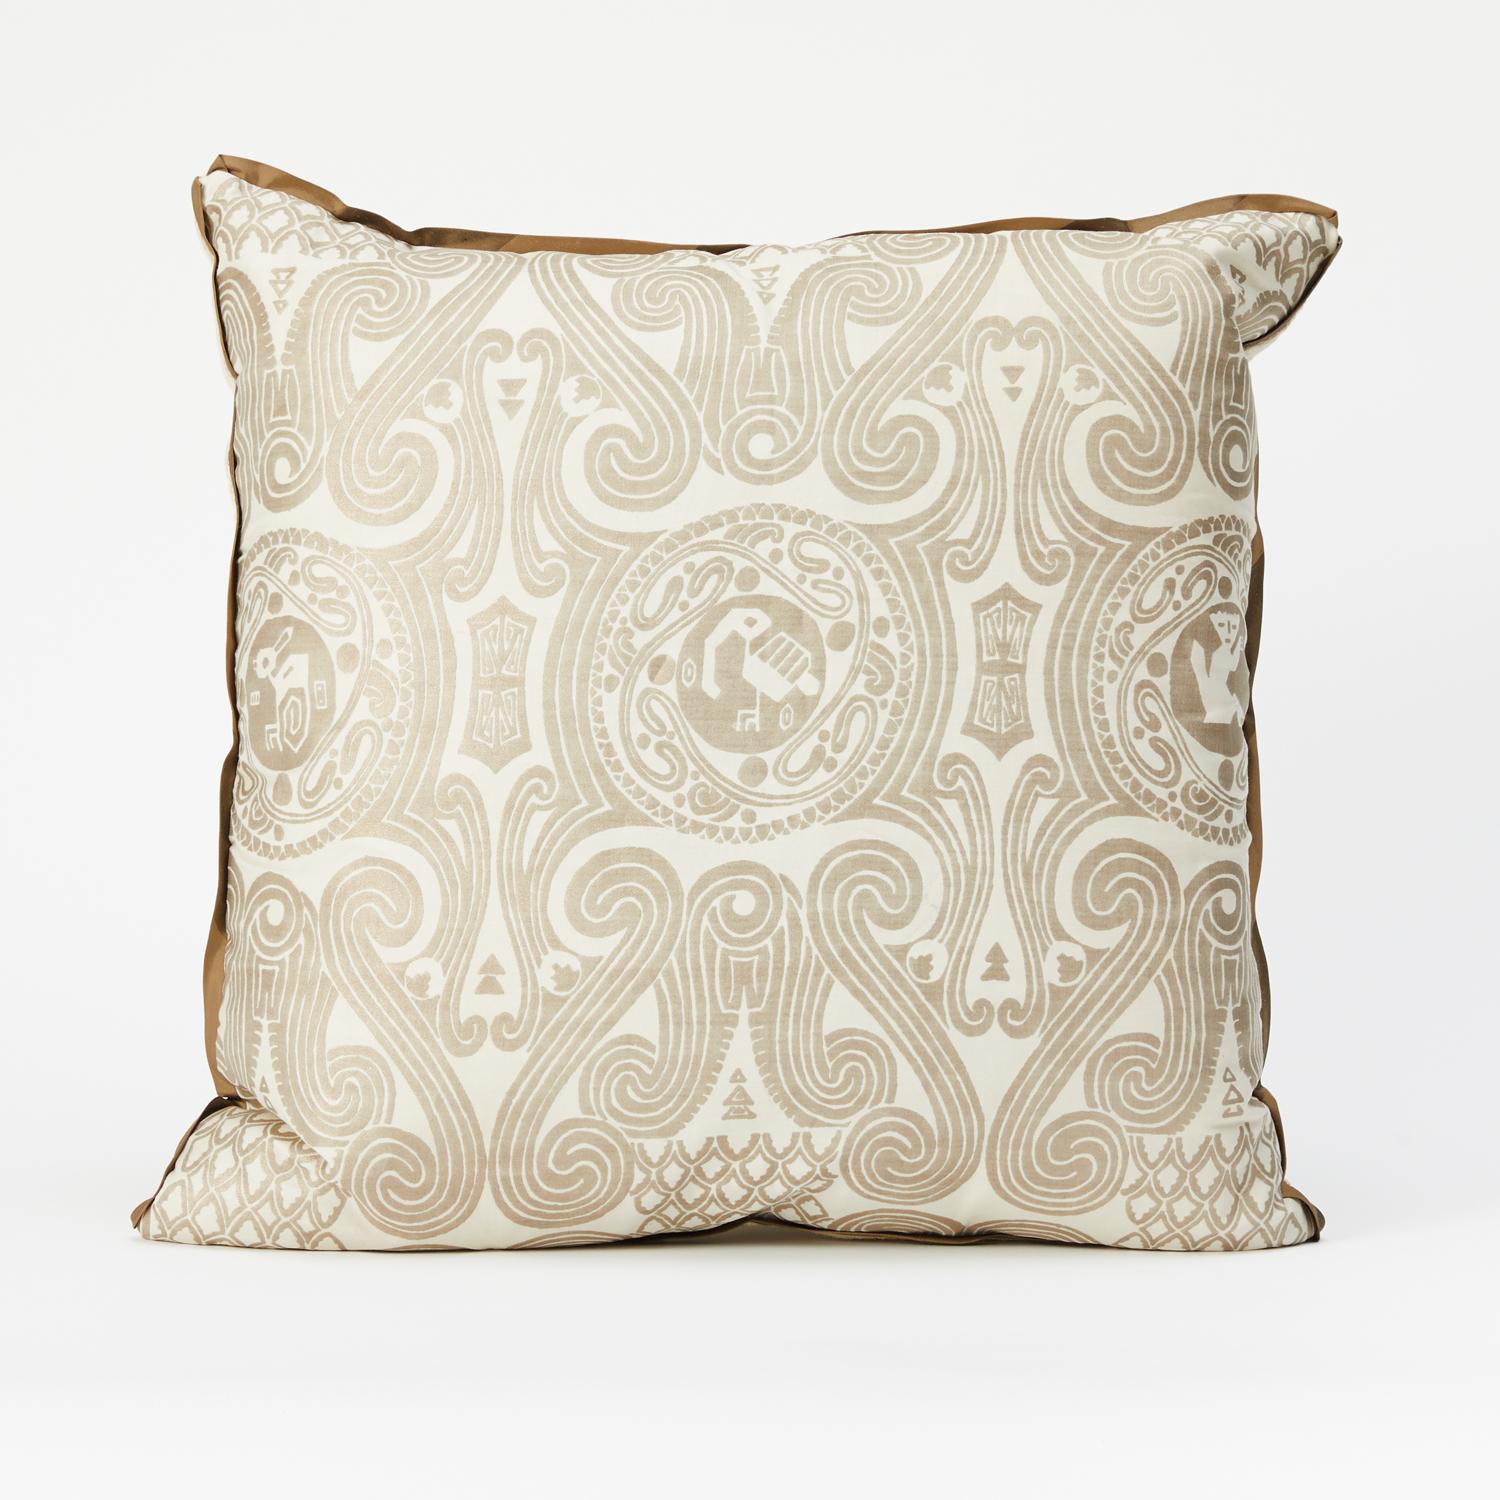 A pair of Fortuny fabric cushions in the Peruviano Inca pattern, with lovely cream and silver color way. Featuring a silk bias edging and backing with cream colored woven fabric.

50 down/50 feather insert. Newly made using Fortuny fabric.